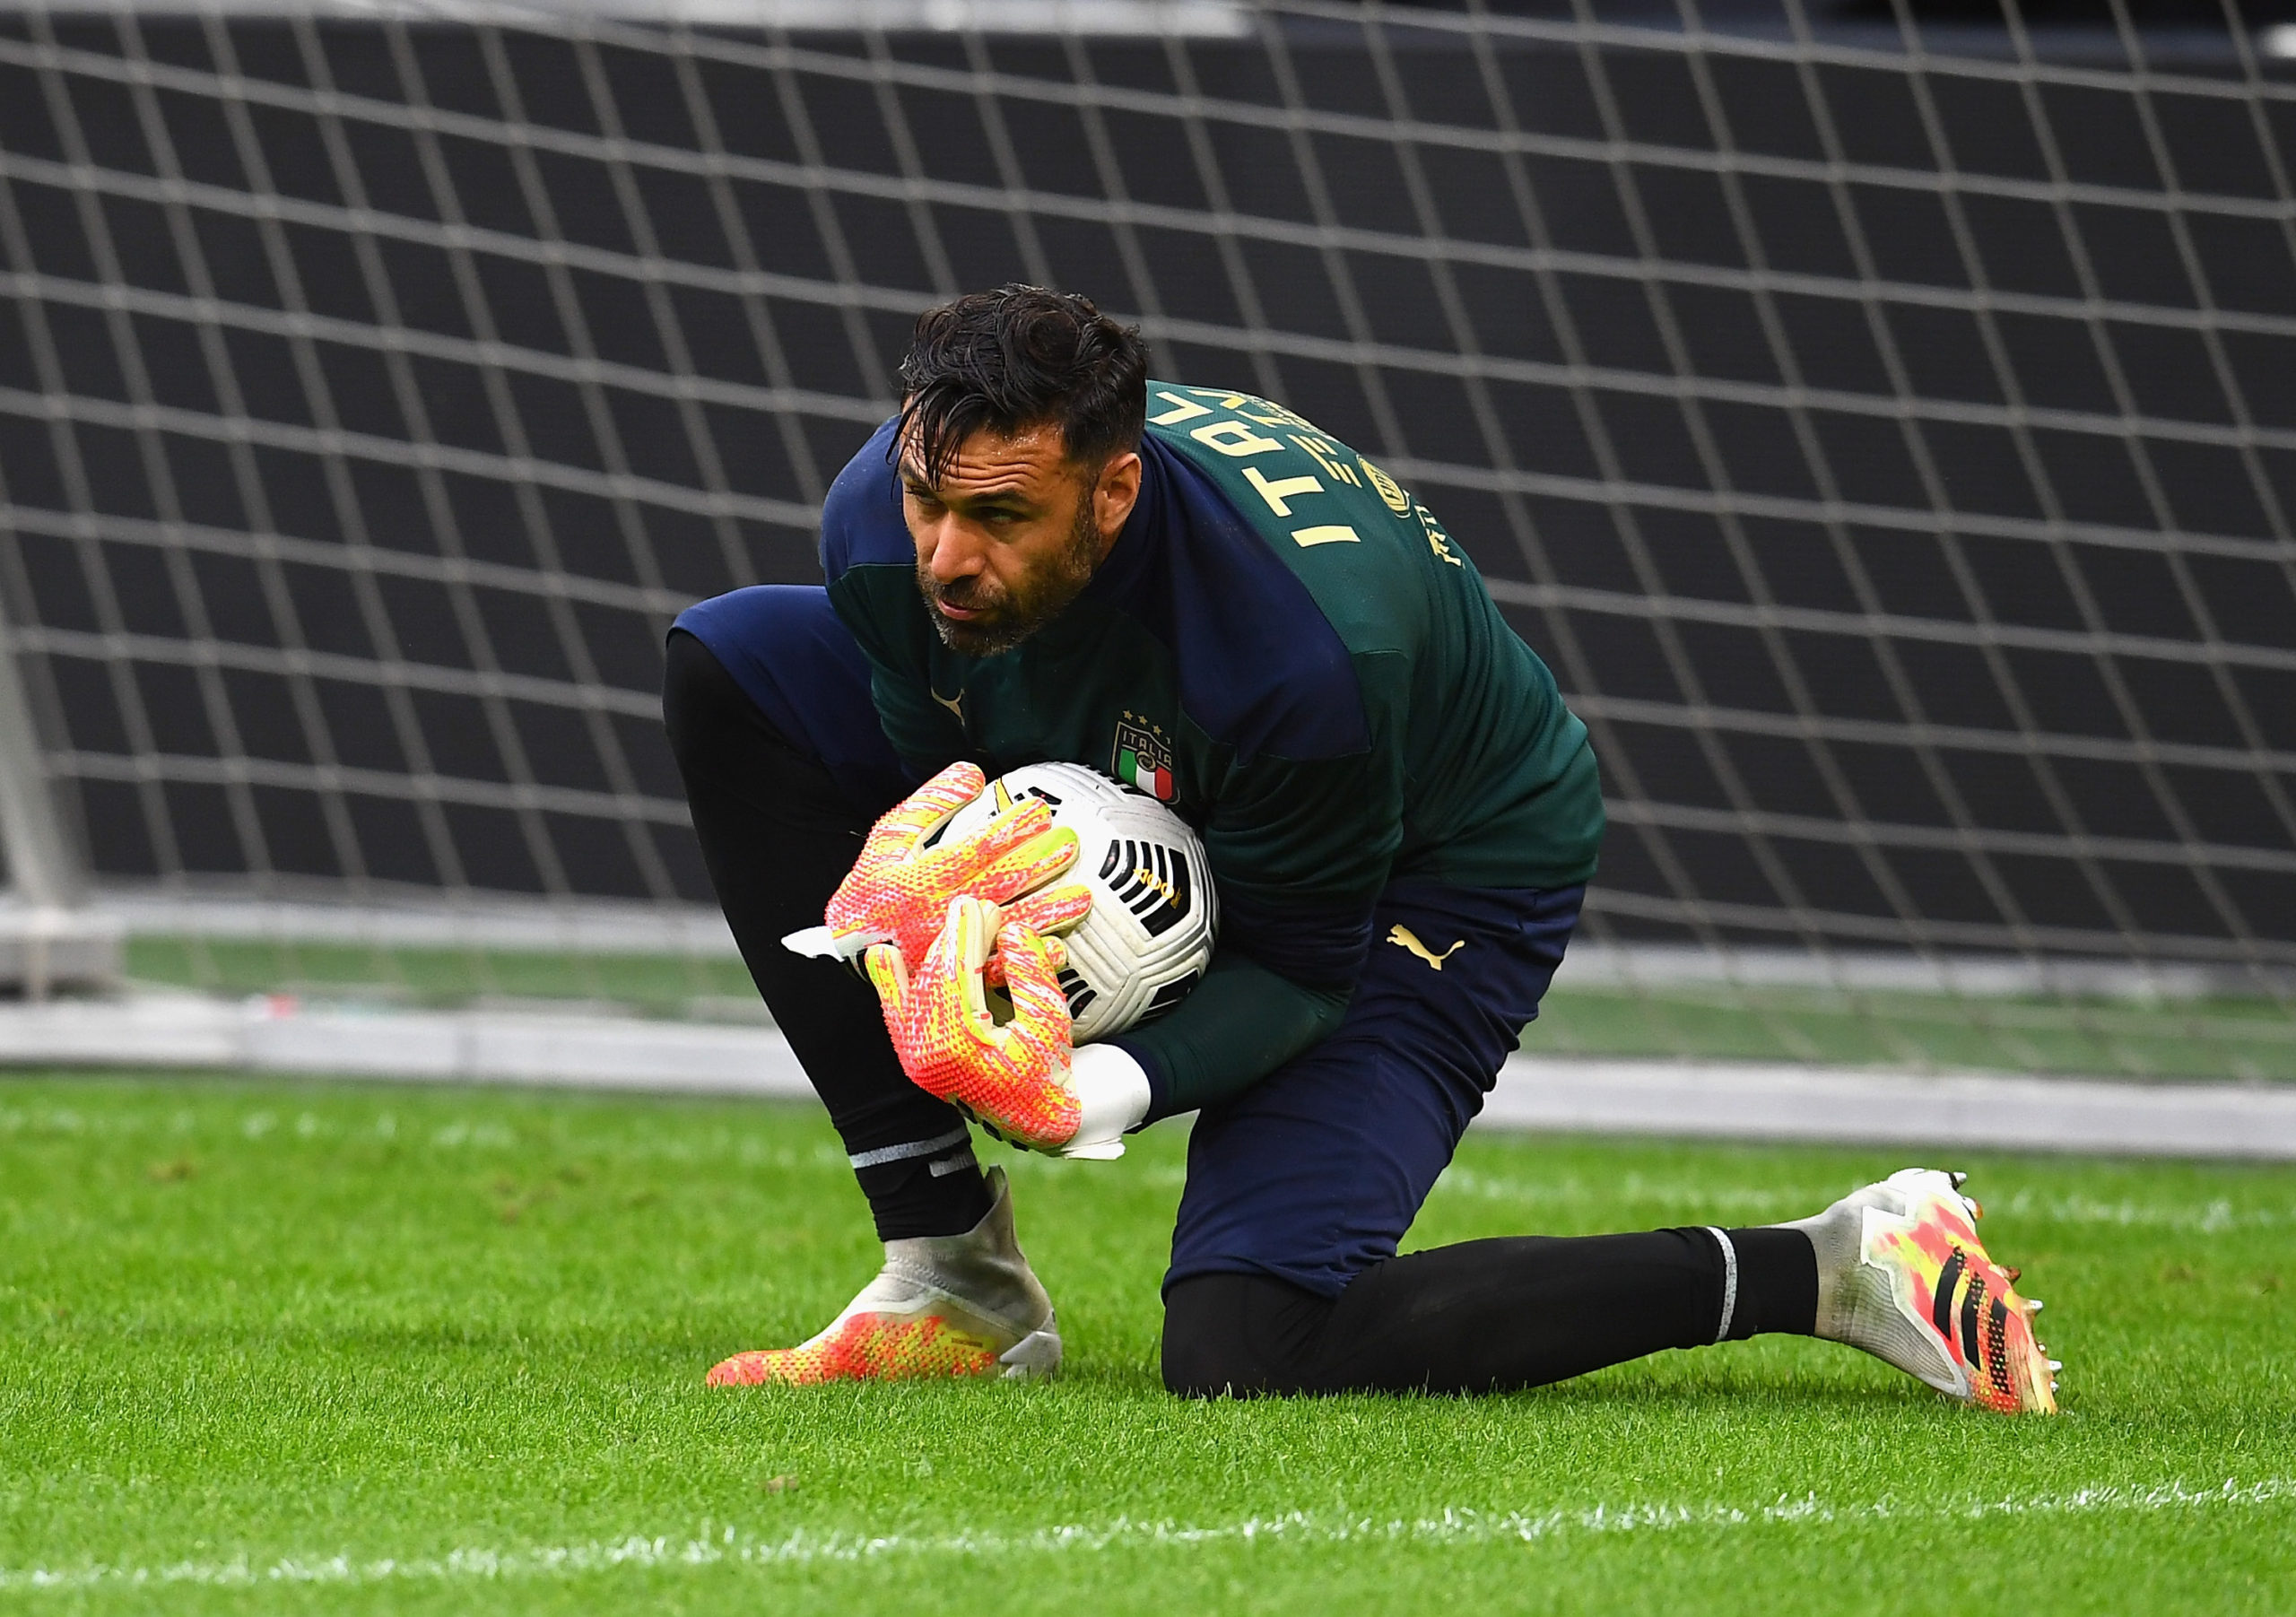 While it’s not yet sure who their starting goalkeeper will be, Napoli have found their next back-up in veteran Salvatore Sirigu.